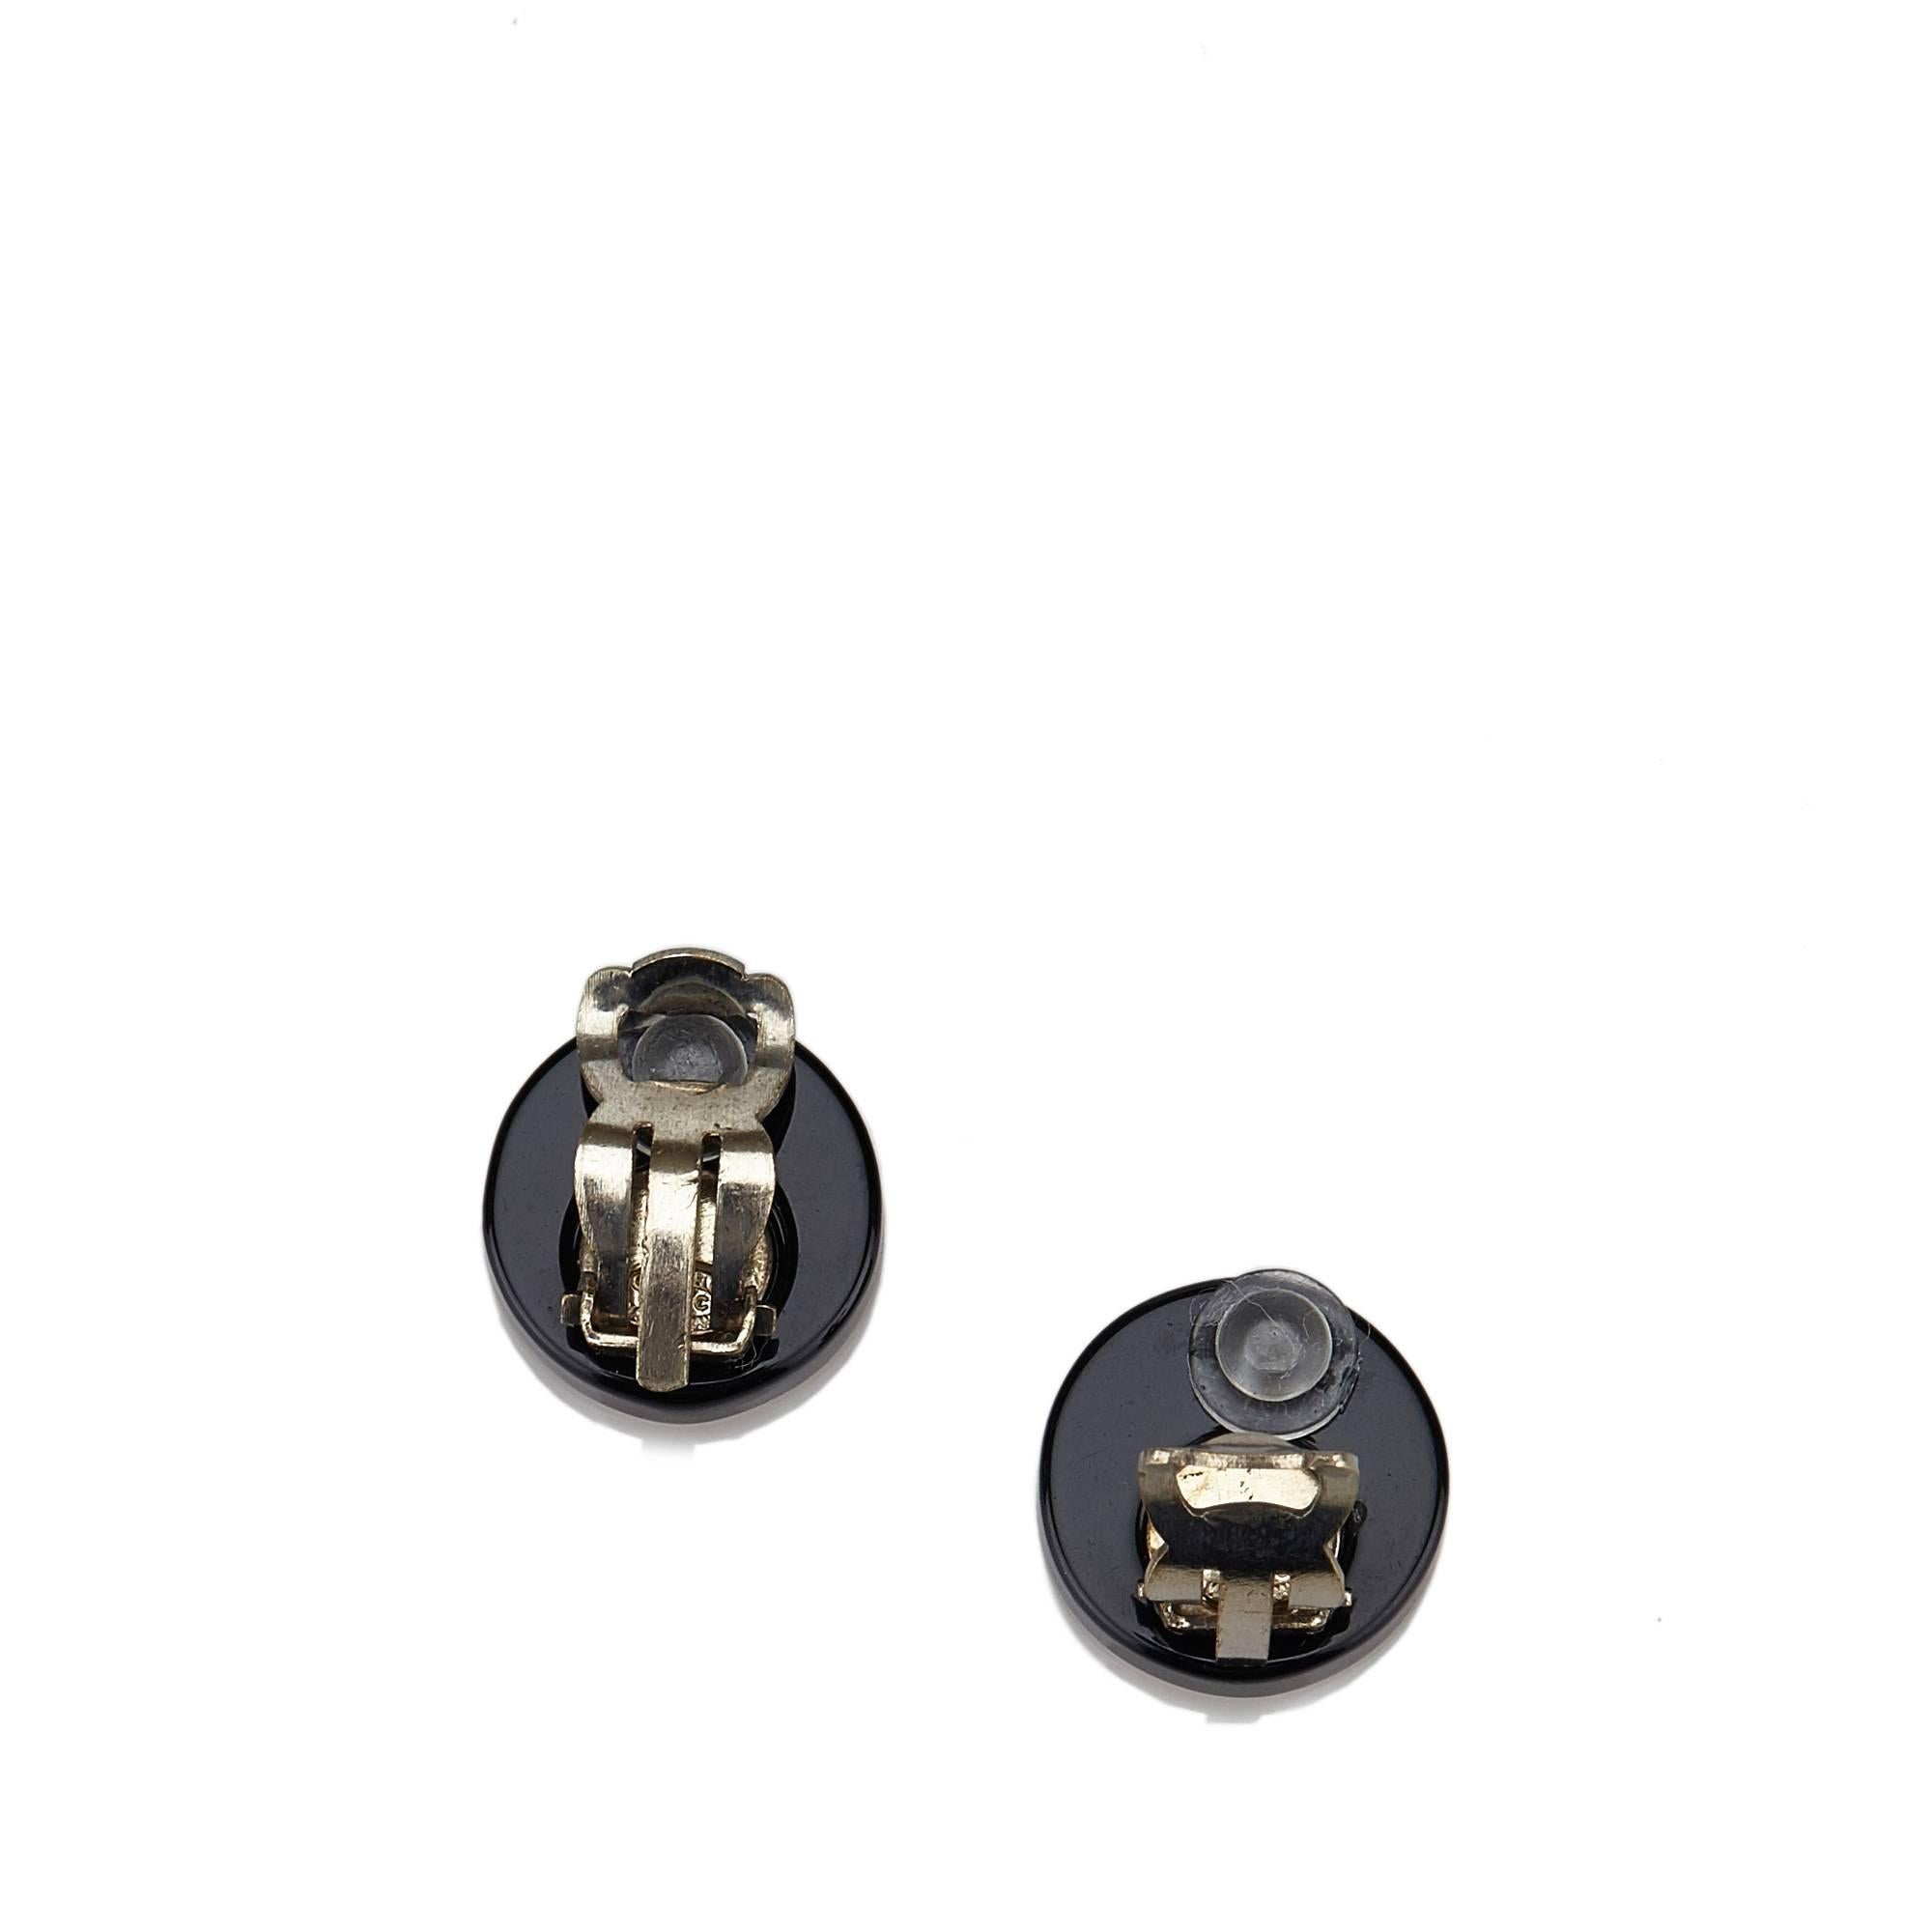 - Chanel black and white Coco paris clip on earrings from year 2006 collection  These earrings feature striped plastic hardware, interlocking Cs, and silver-tone back clip-on closures.

- Made in France. 

- Diameter: 1.5cm. 

- Include: Box. 

-